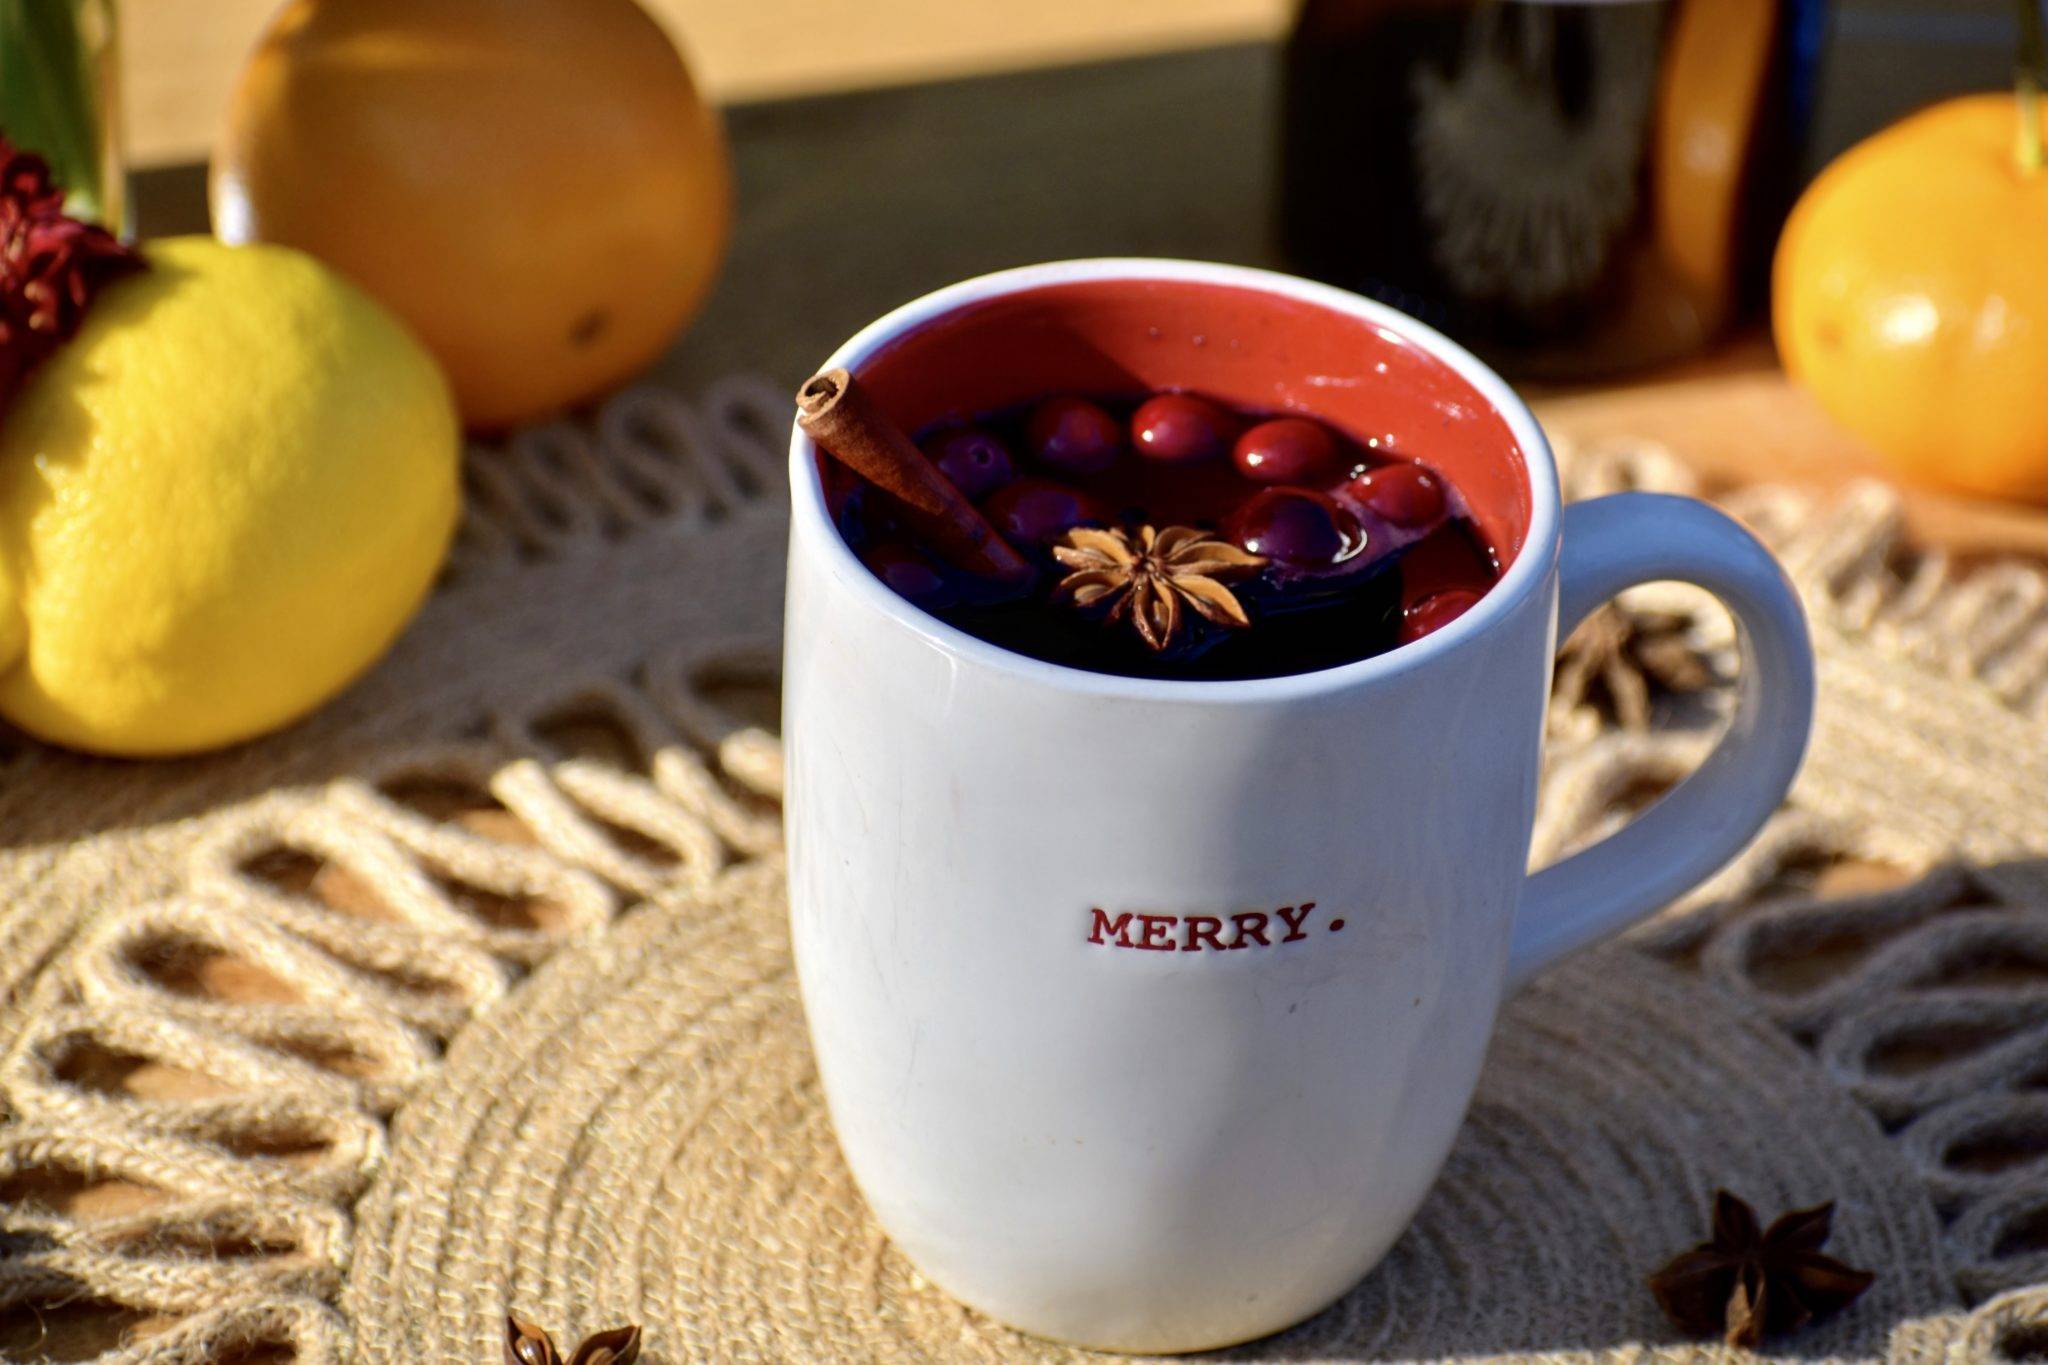 Holiday Mulled Wine Recipe from McGrail McGrail Vineyards